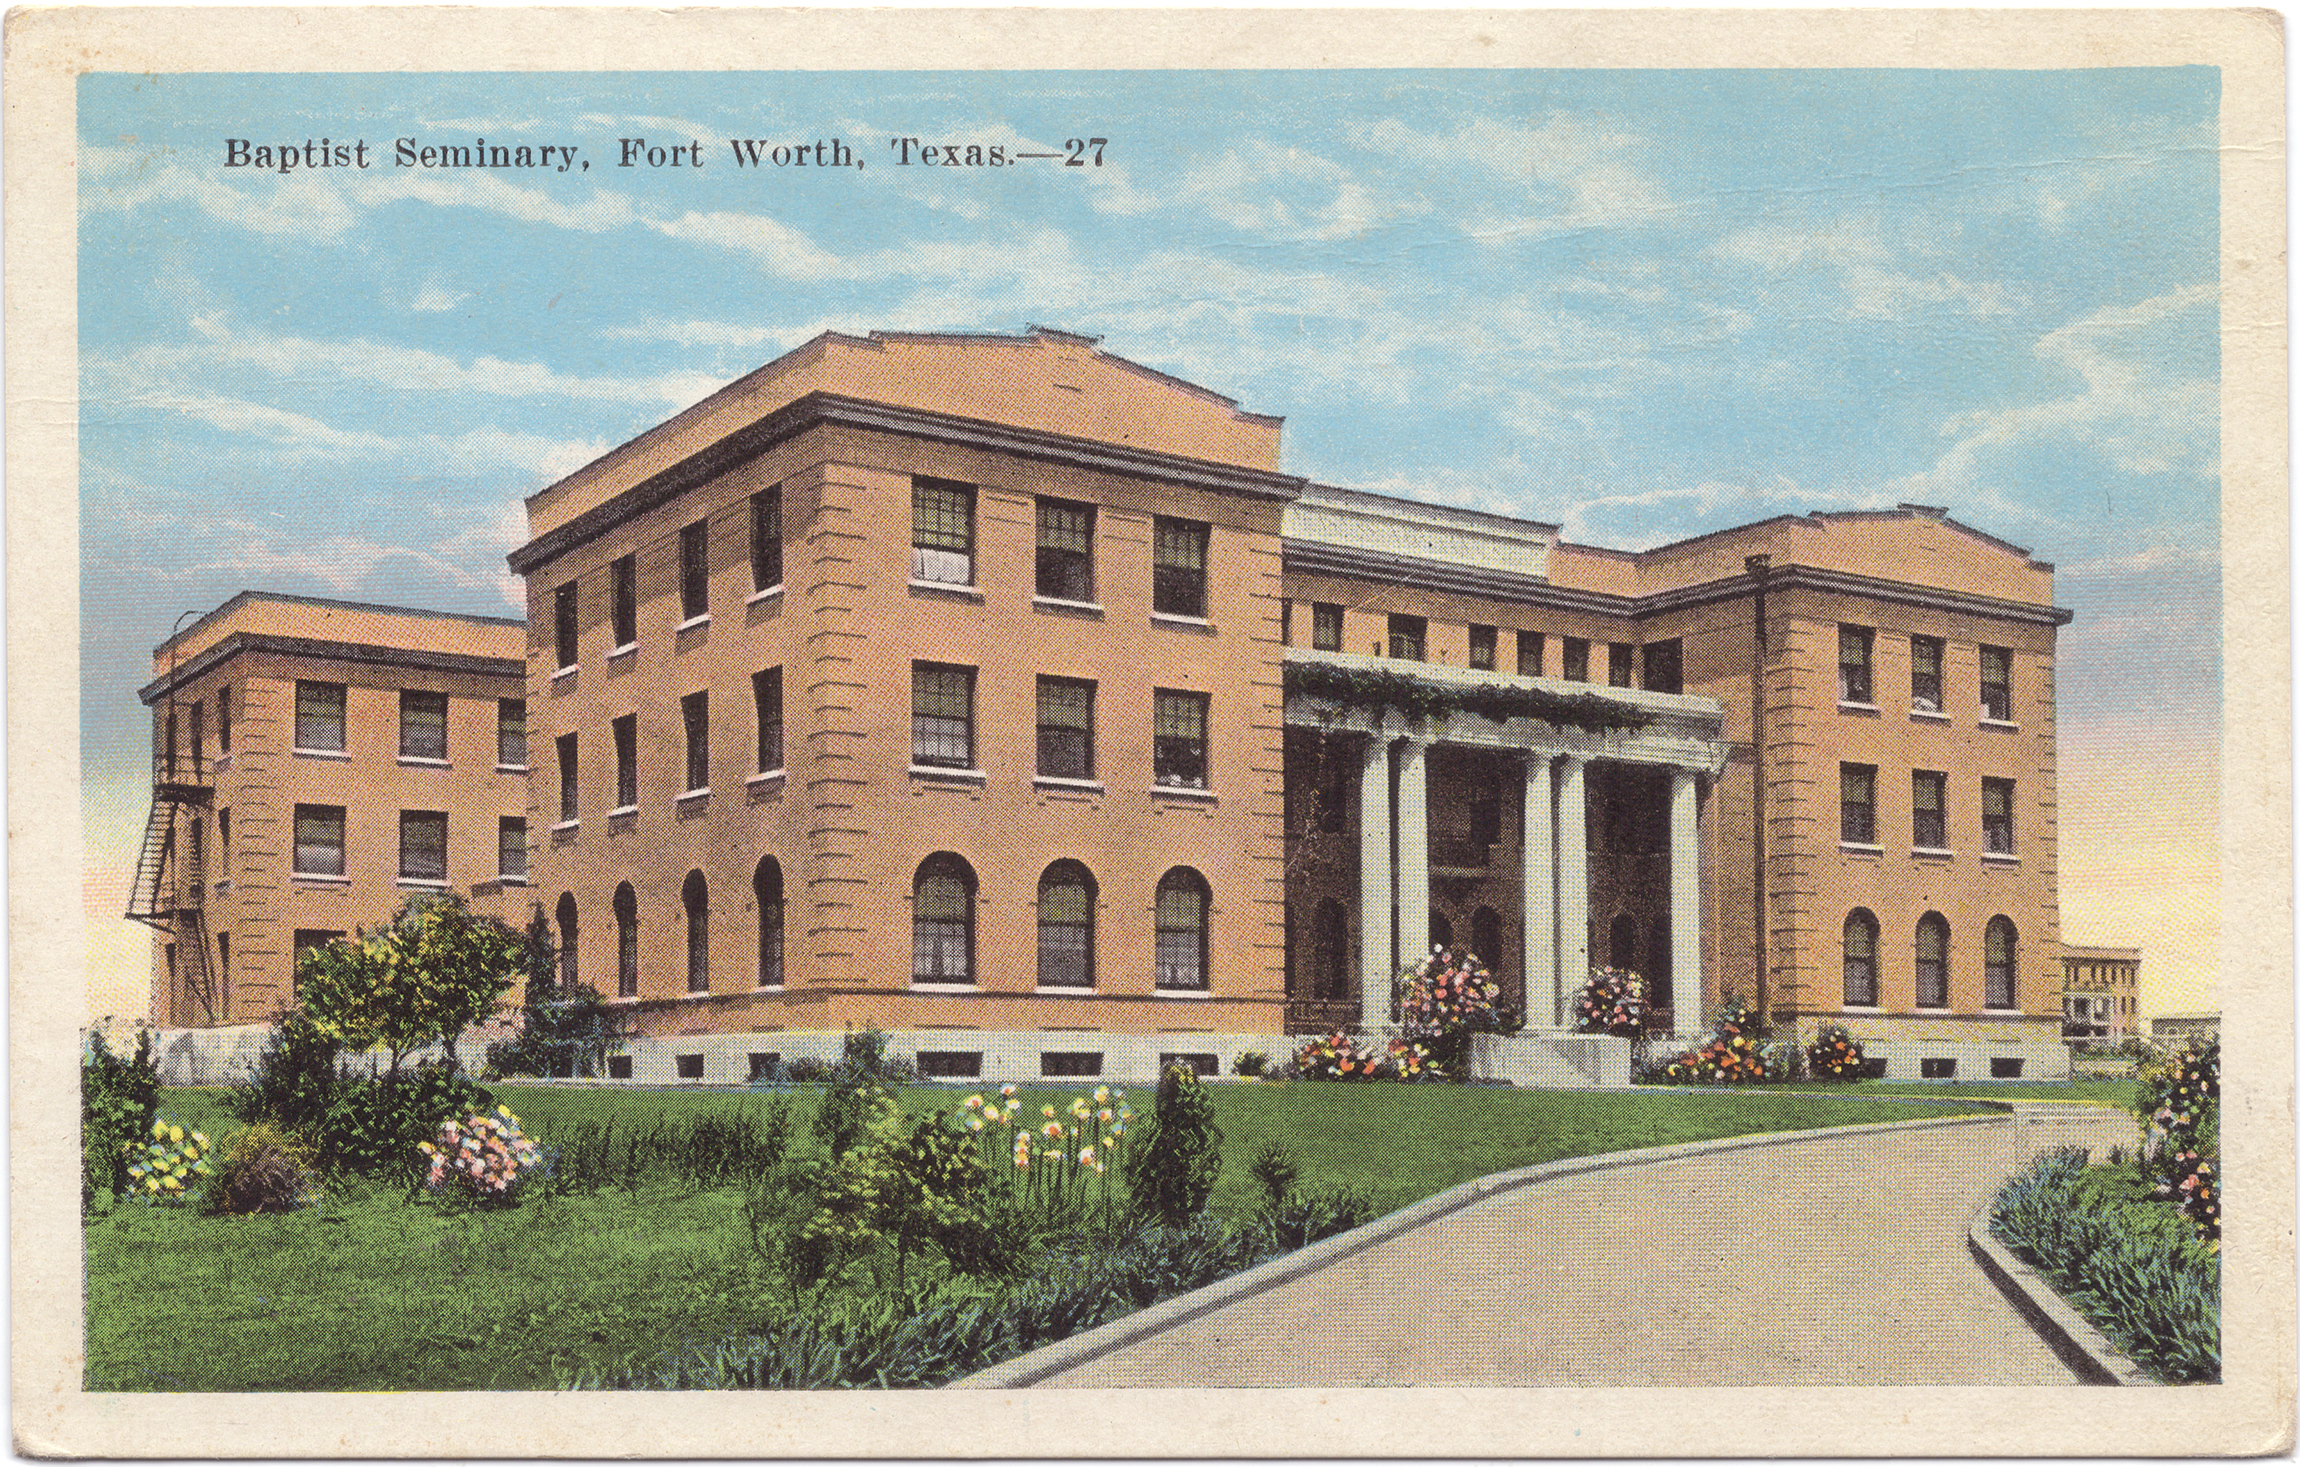 The postcard features a photo of the front of the building.